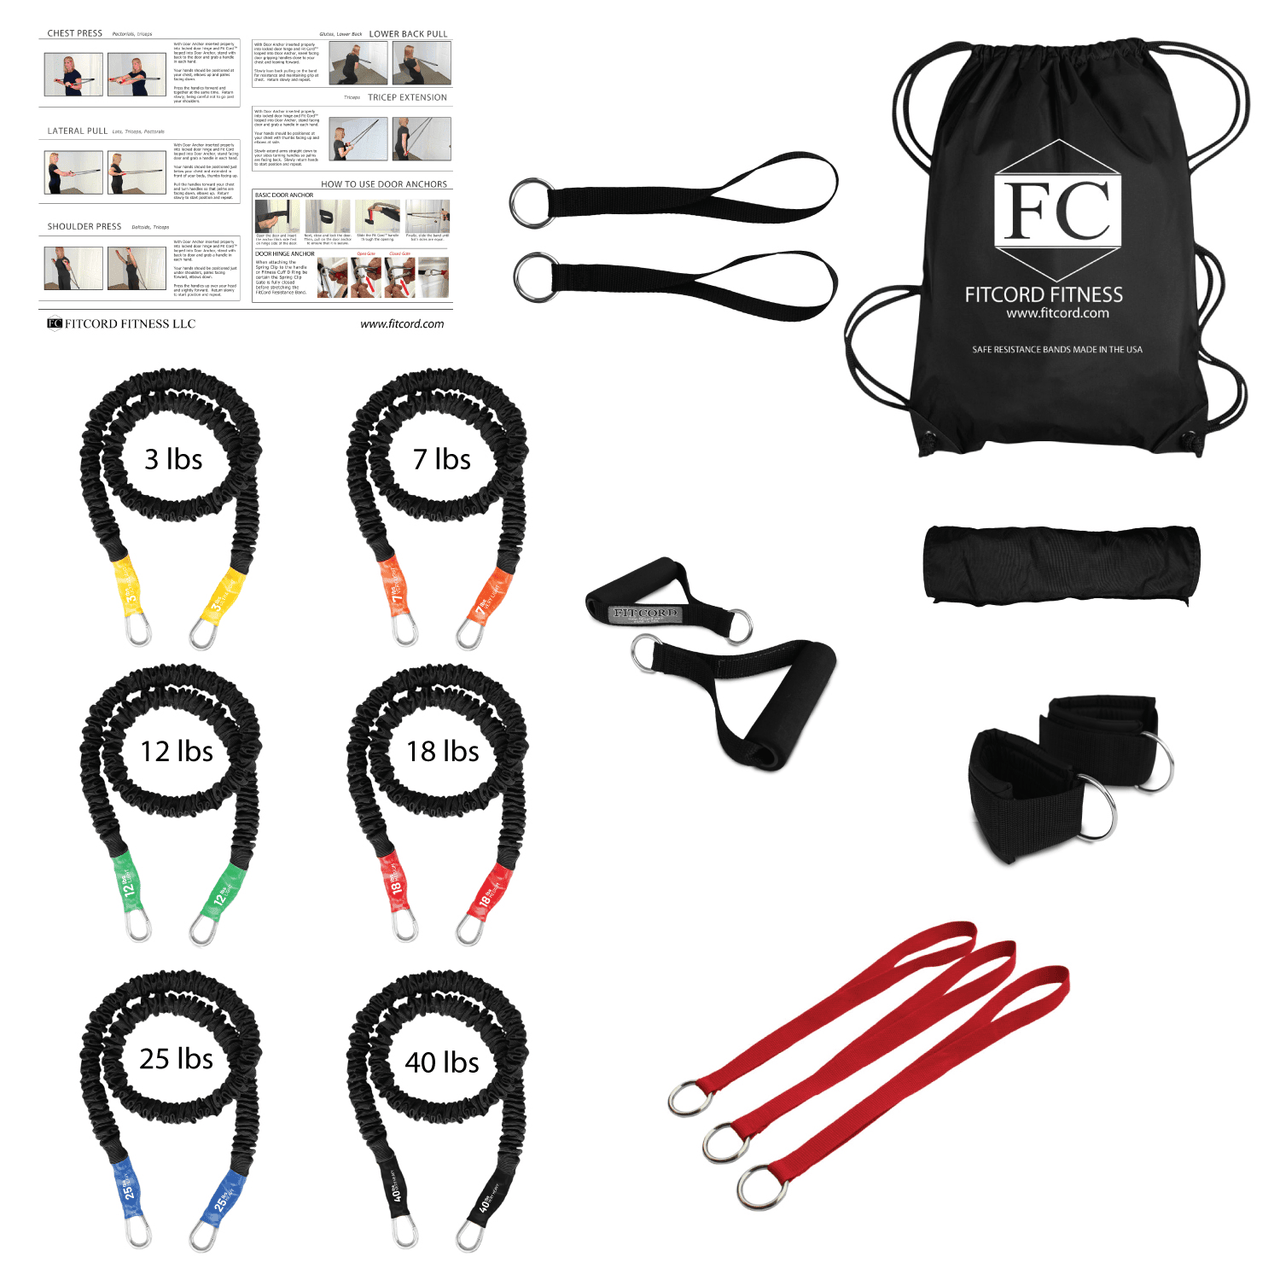 Resistance band load kit American Made Stackable bungee style resistance bands with clips for fitness bar, handles, foot straps and cuffs